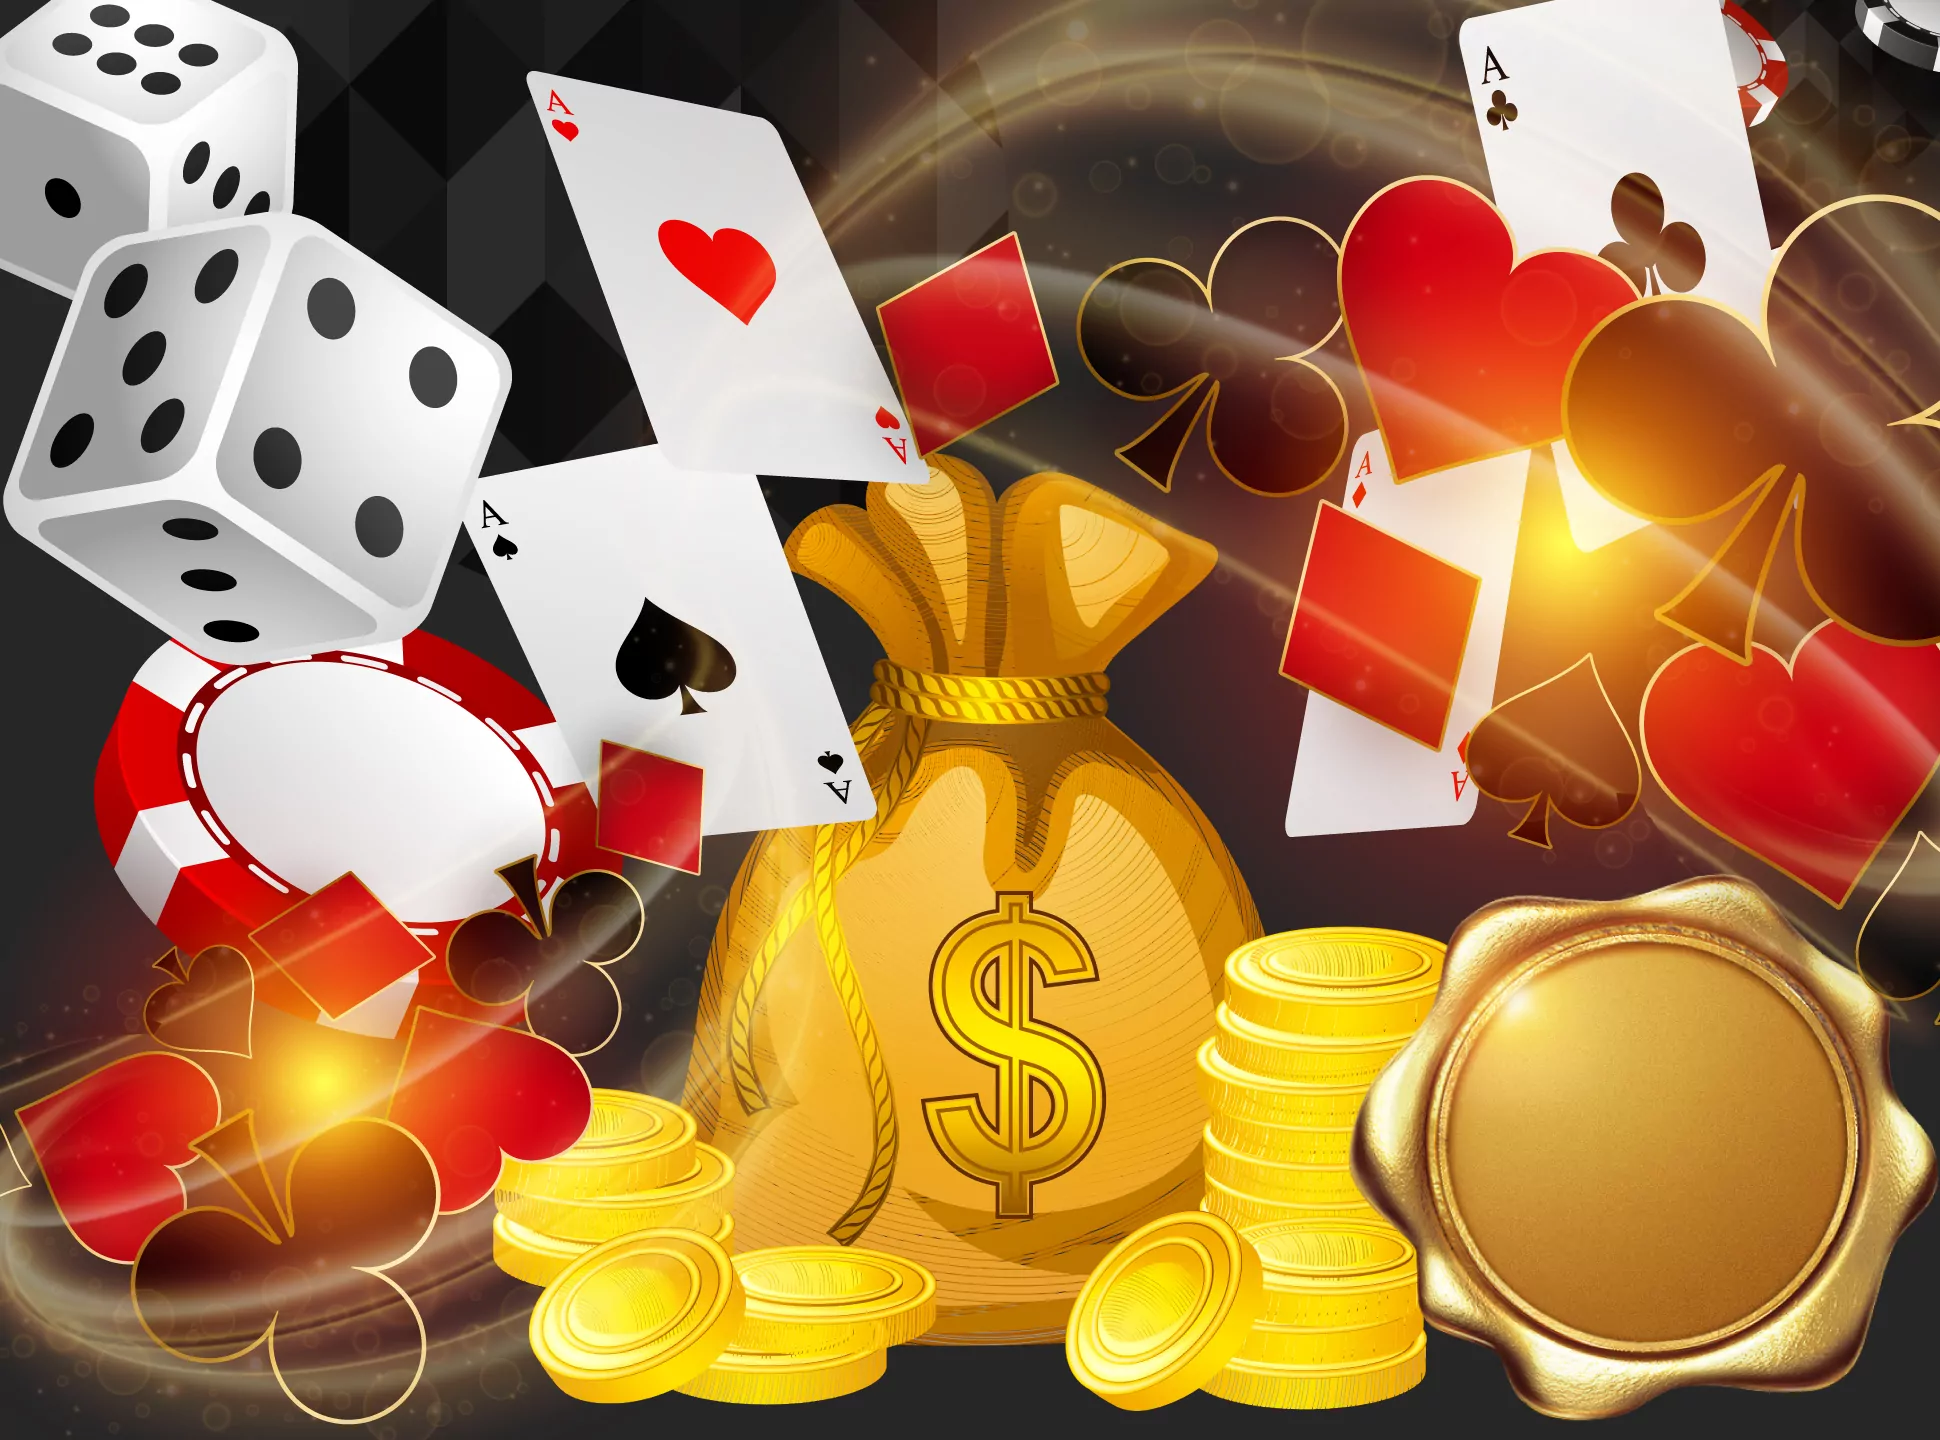 You can legally play online casino games in Bangladesh.